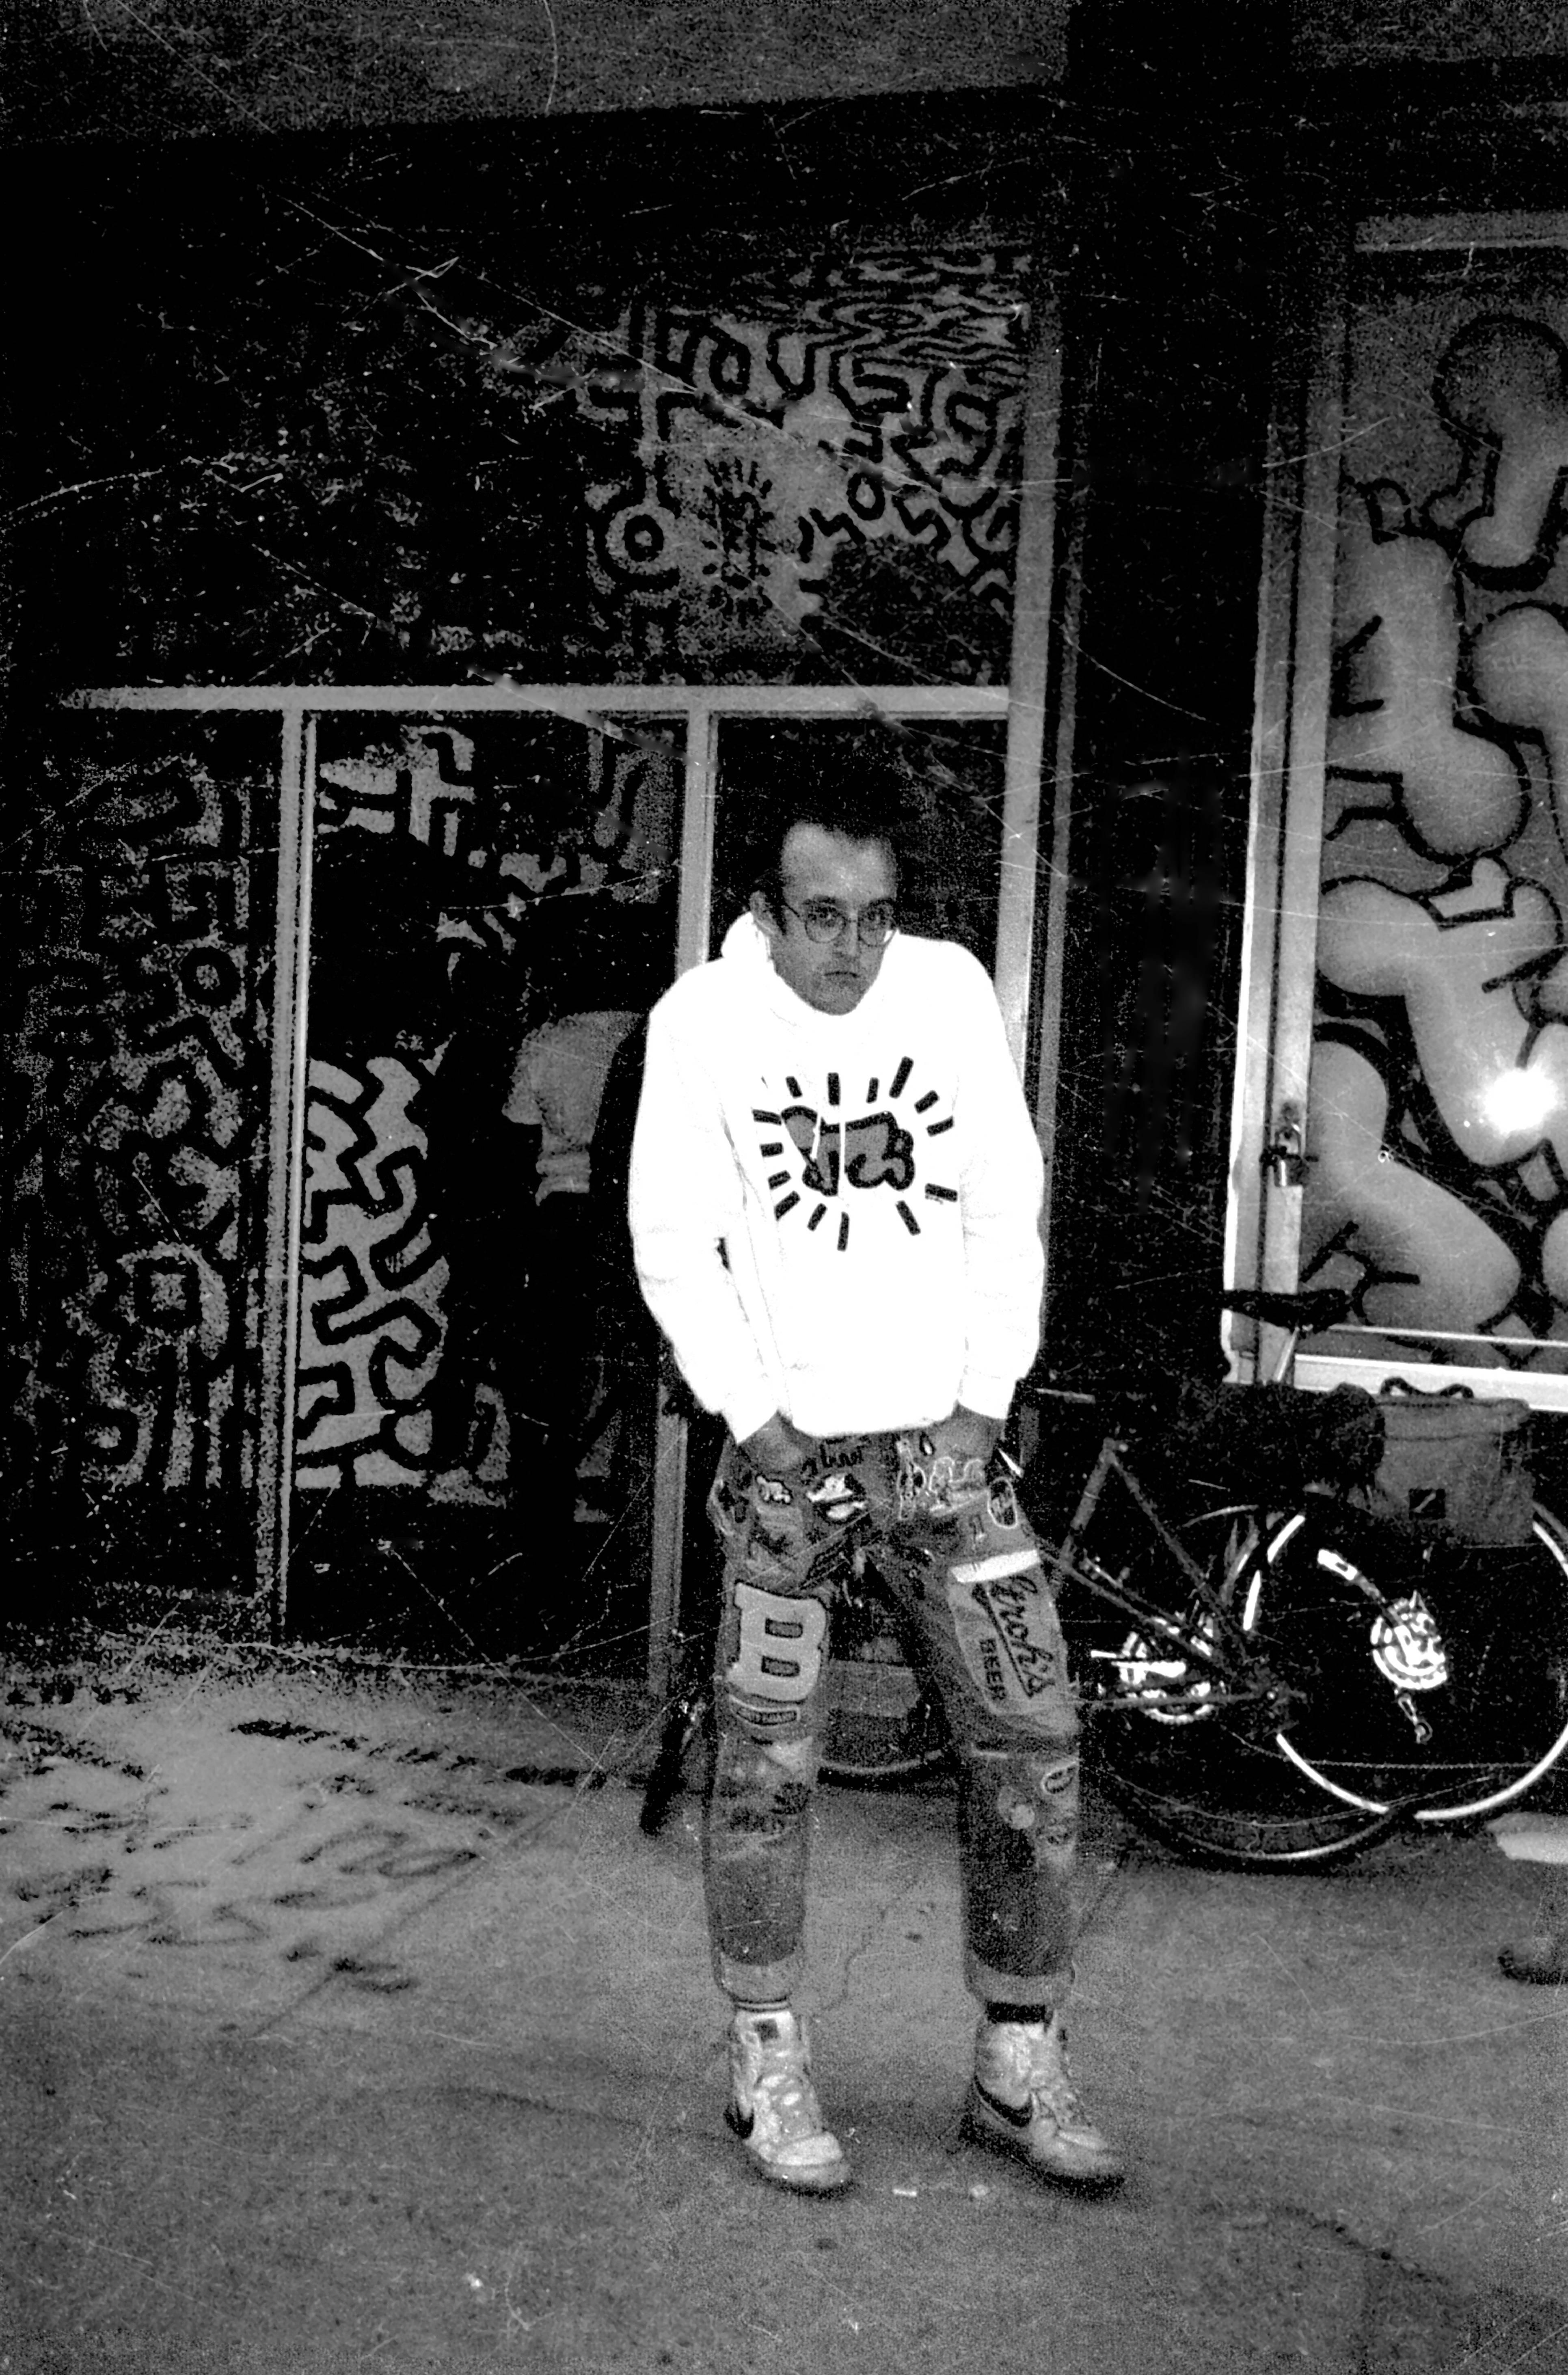 Ricky Powell Black and White Photograph - Keith Haring Pop Shop